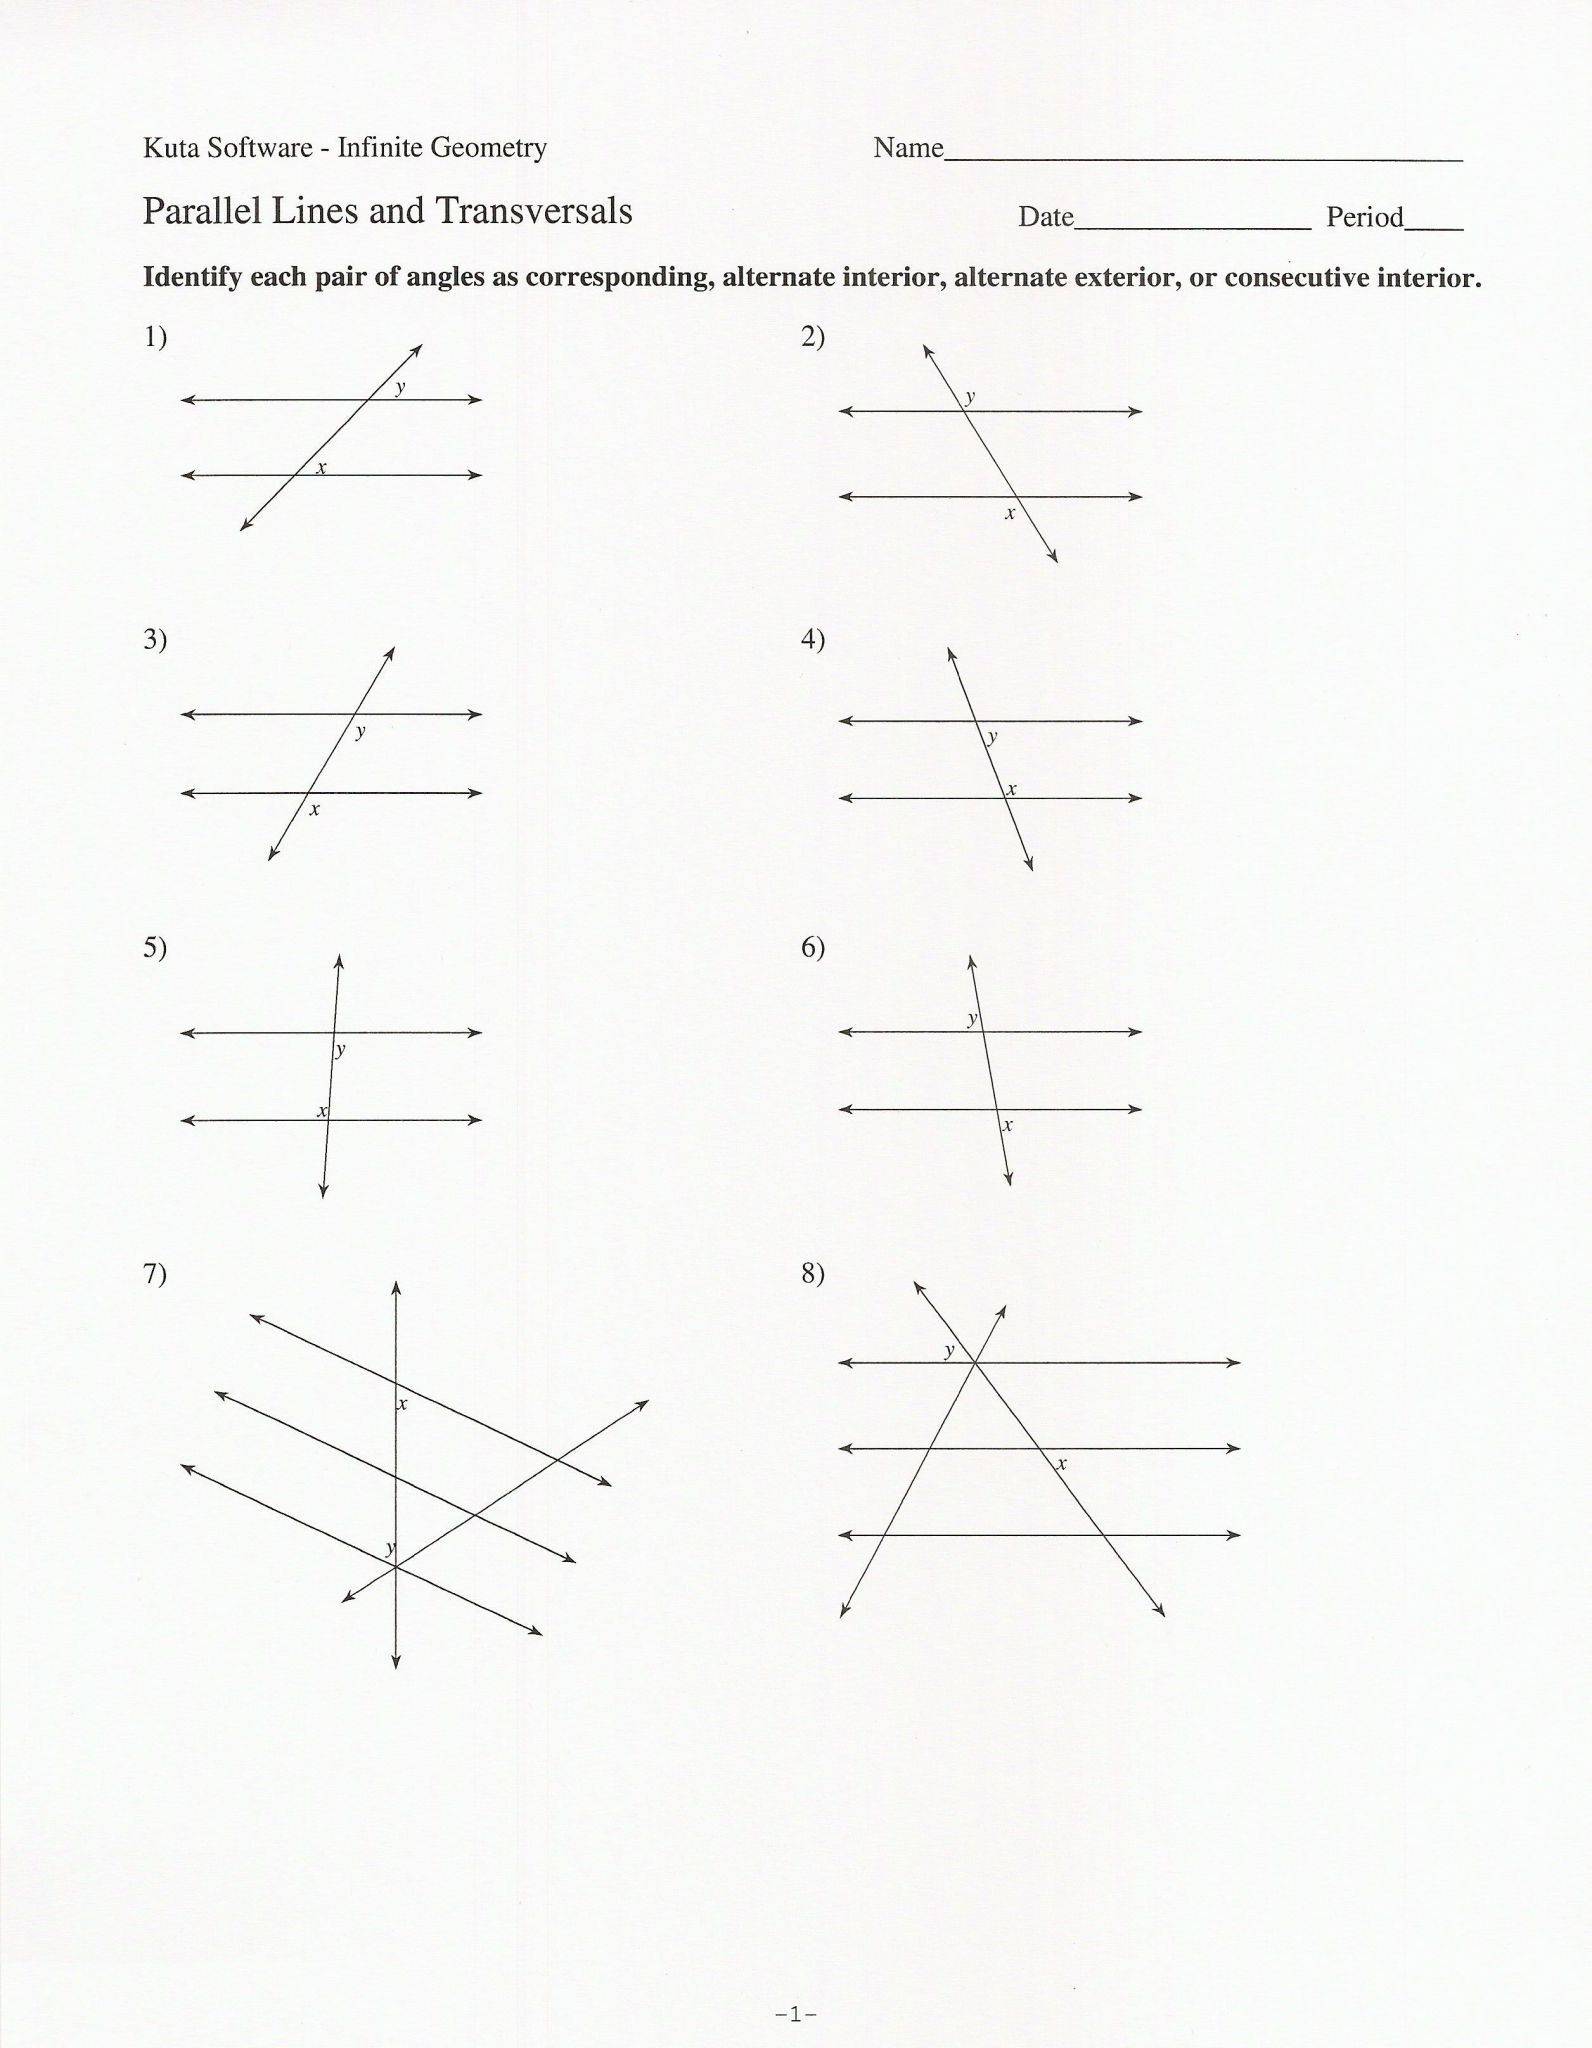 Kuta Software Parallel Lines And Transversals Worksheet Answer Key